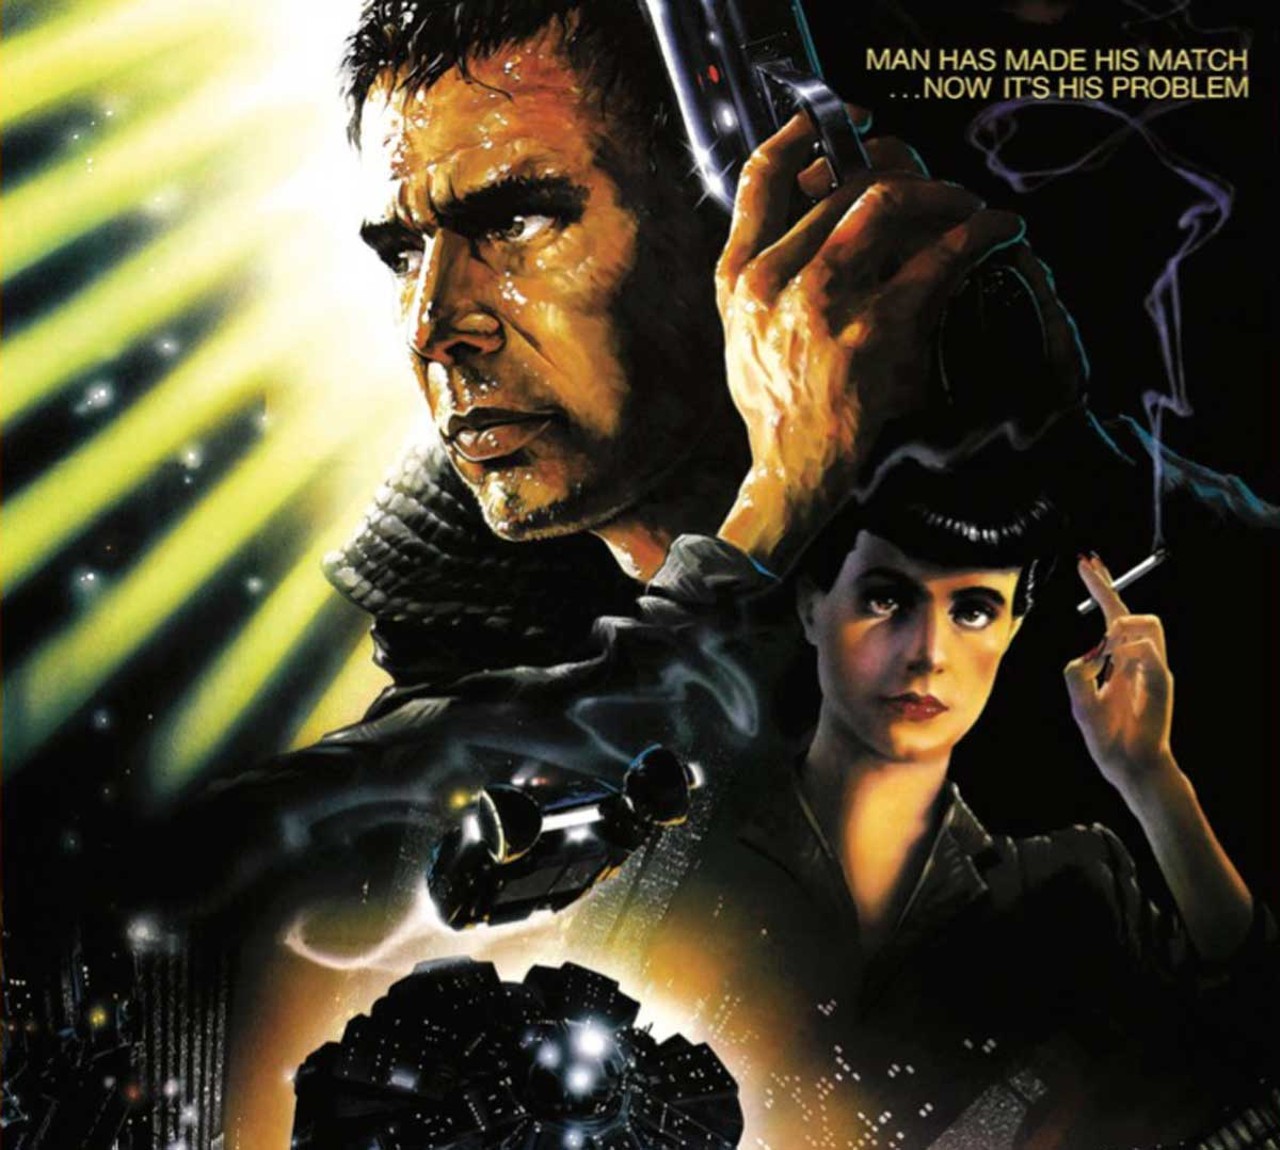 
Screening of ‘Blade Runner’ Director’s Cut
When: March 1 at 8 p.m.
Where: Redford Theatre
What: A film screening
Who: Sci-fi lovers
Why: It’s a classic and there will be plenty of goodies for Blade Runner heads including a raffle for memorabilia and illustrated prints available for purchase.